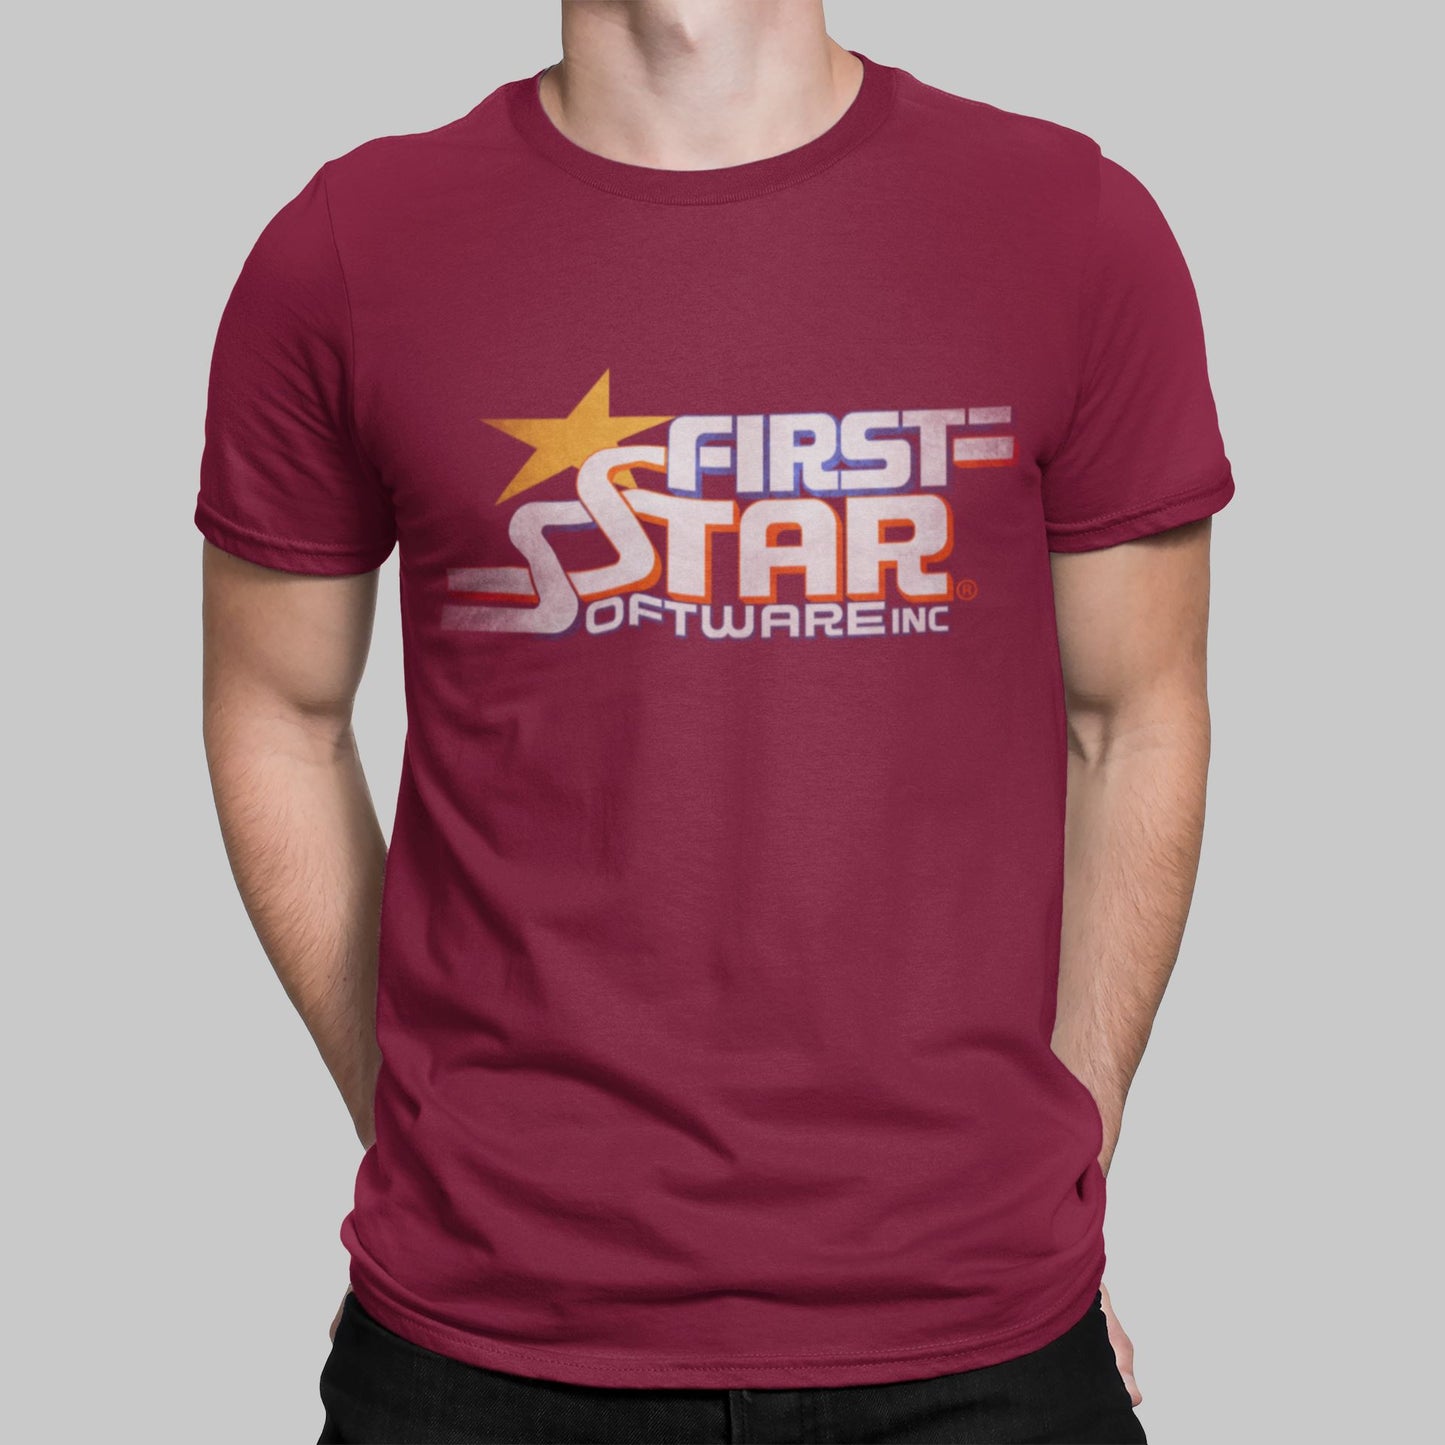 First Star Software Retro Gaming T-Shirt T-Shirt Seven Squared Small 34-36" Cardinal Red 